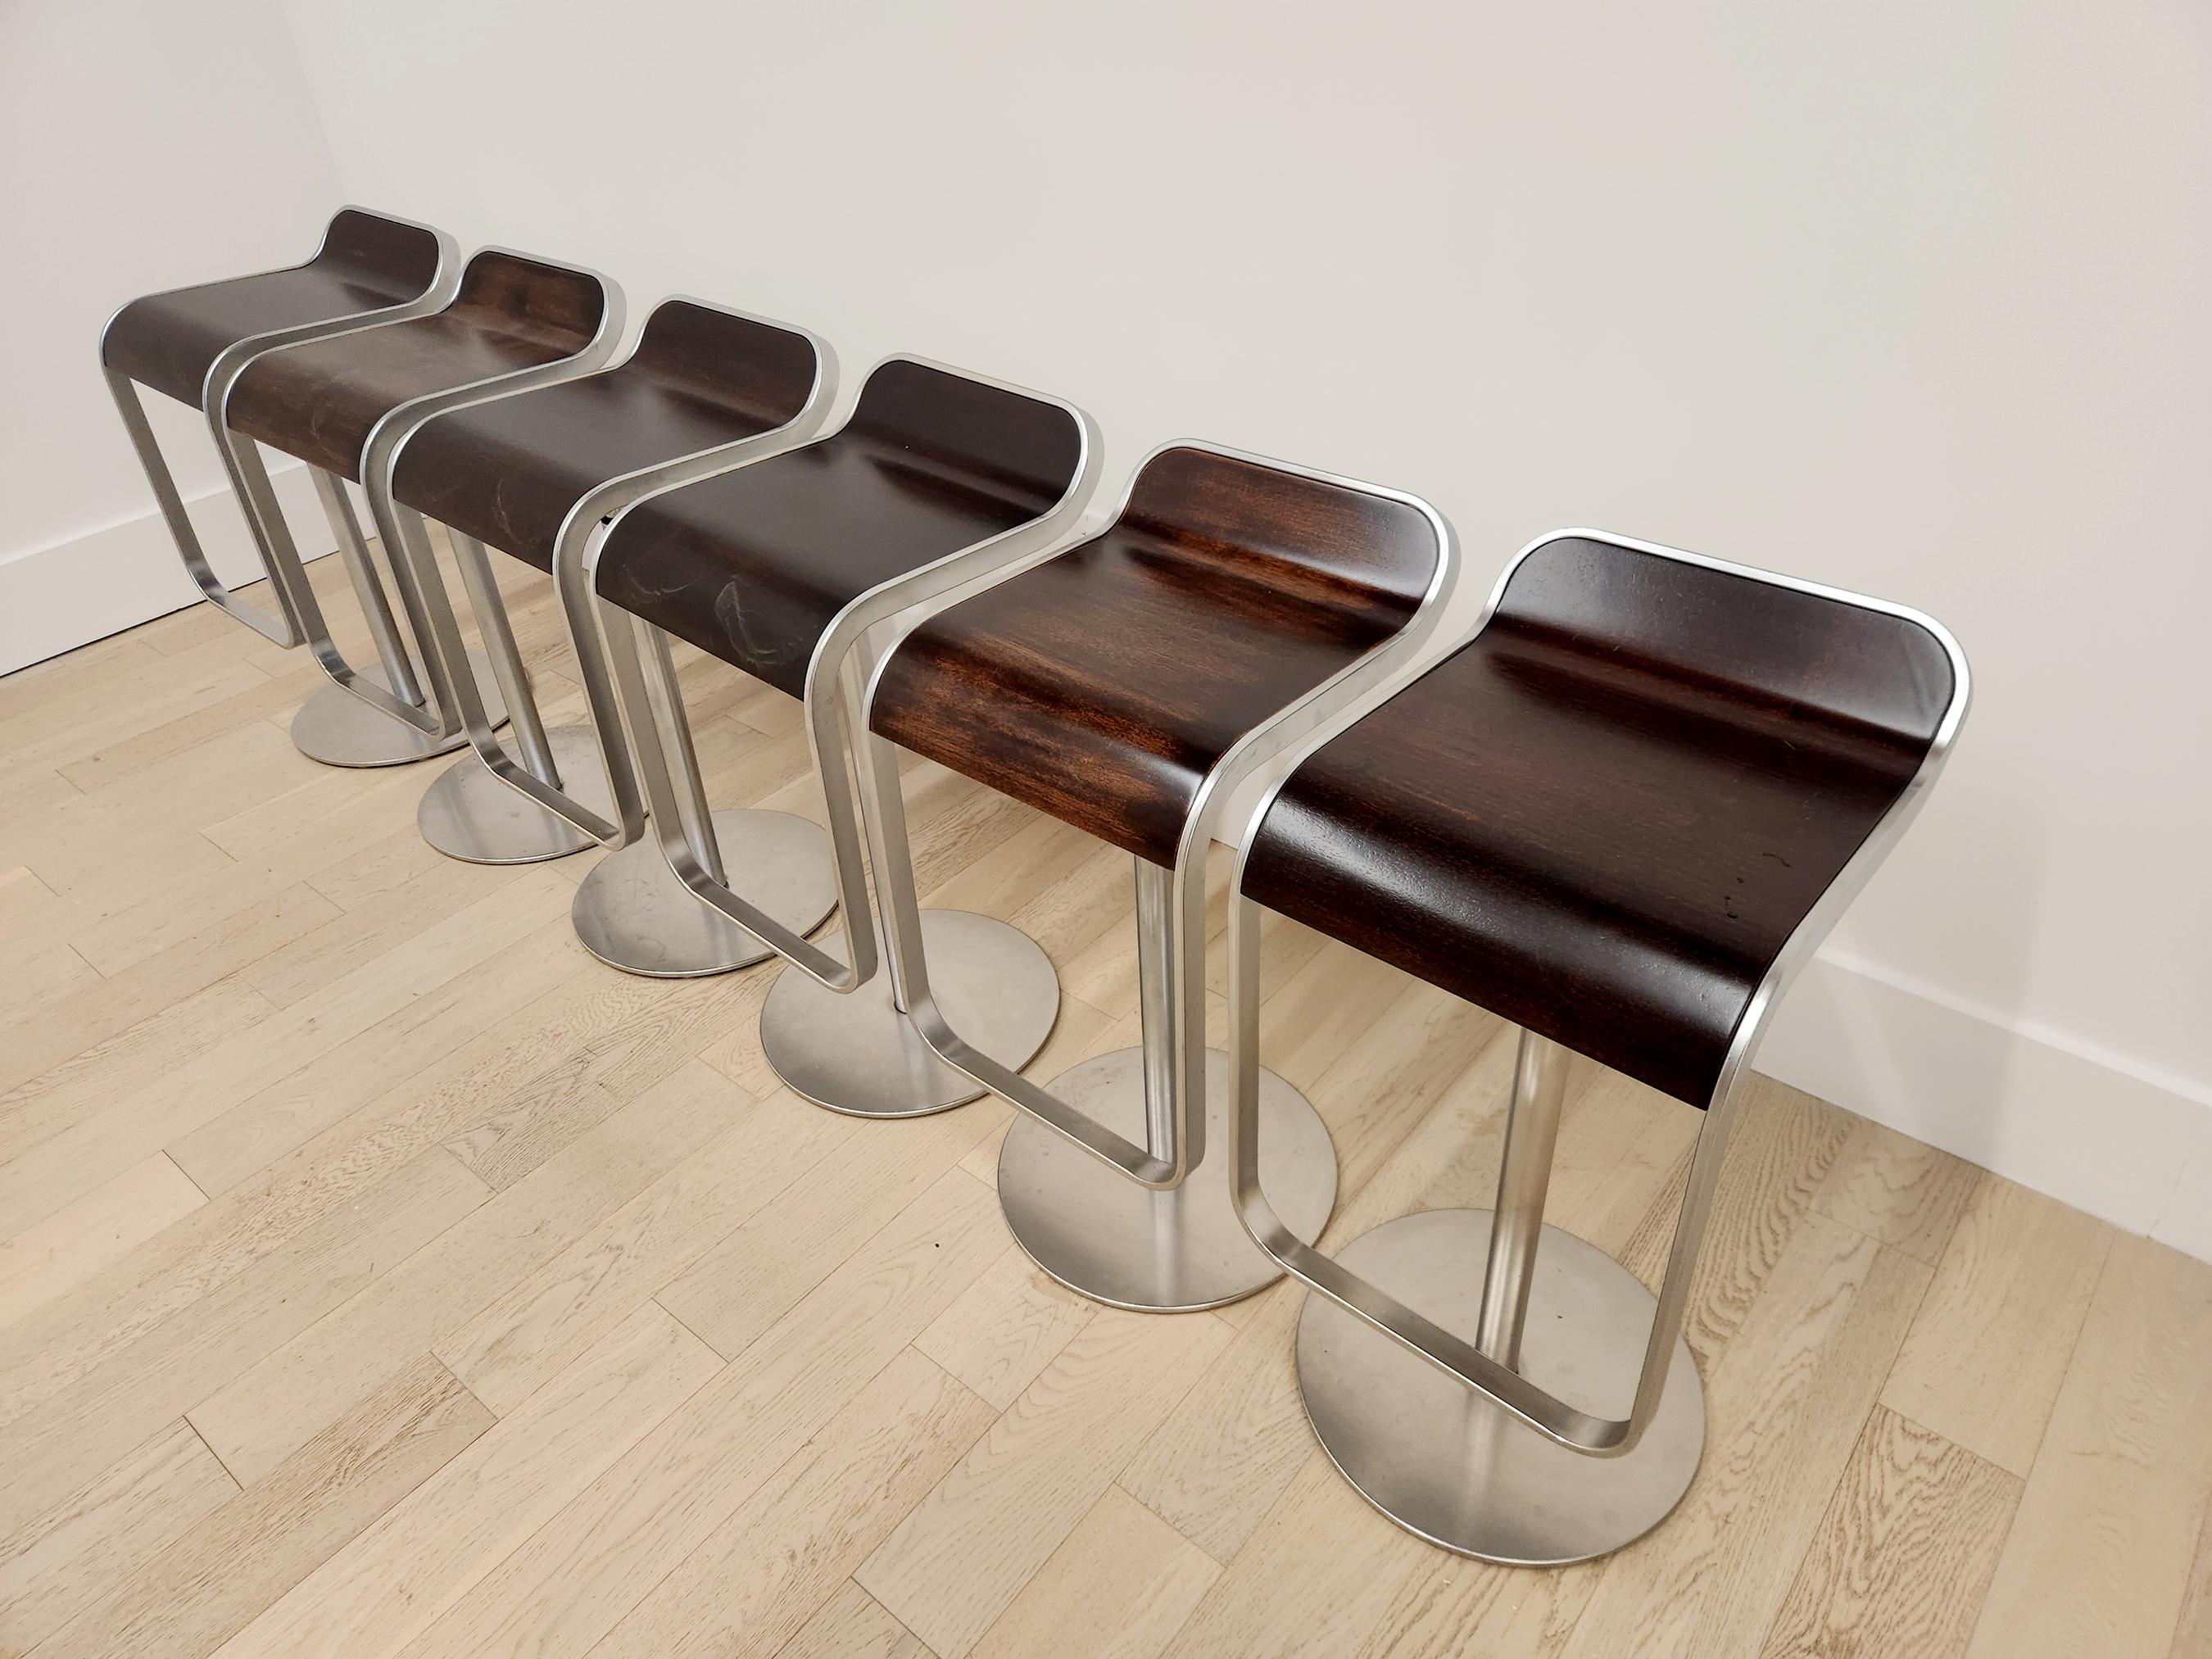 The LEM Piston bar stools were designed by Shin and Tomoko Azumi and made in Italy by LaPalma.   The logo is etched on the bottom of the stool.  Ergonomically designed stainless steel curved frame with beautiful dark oak seat.   The height